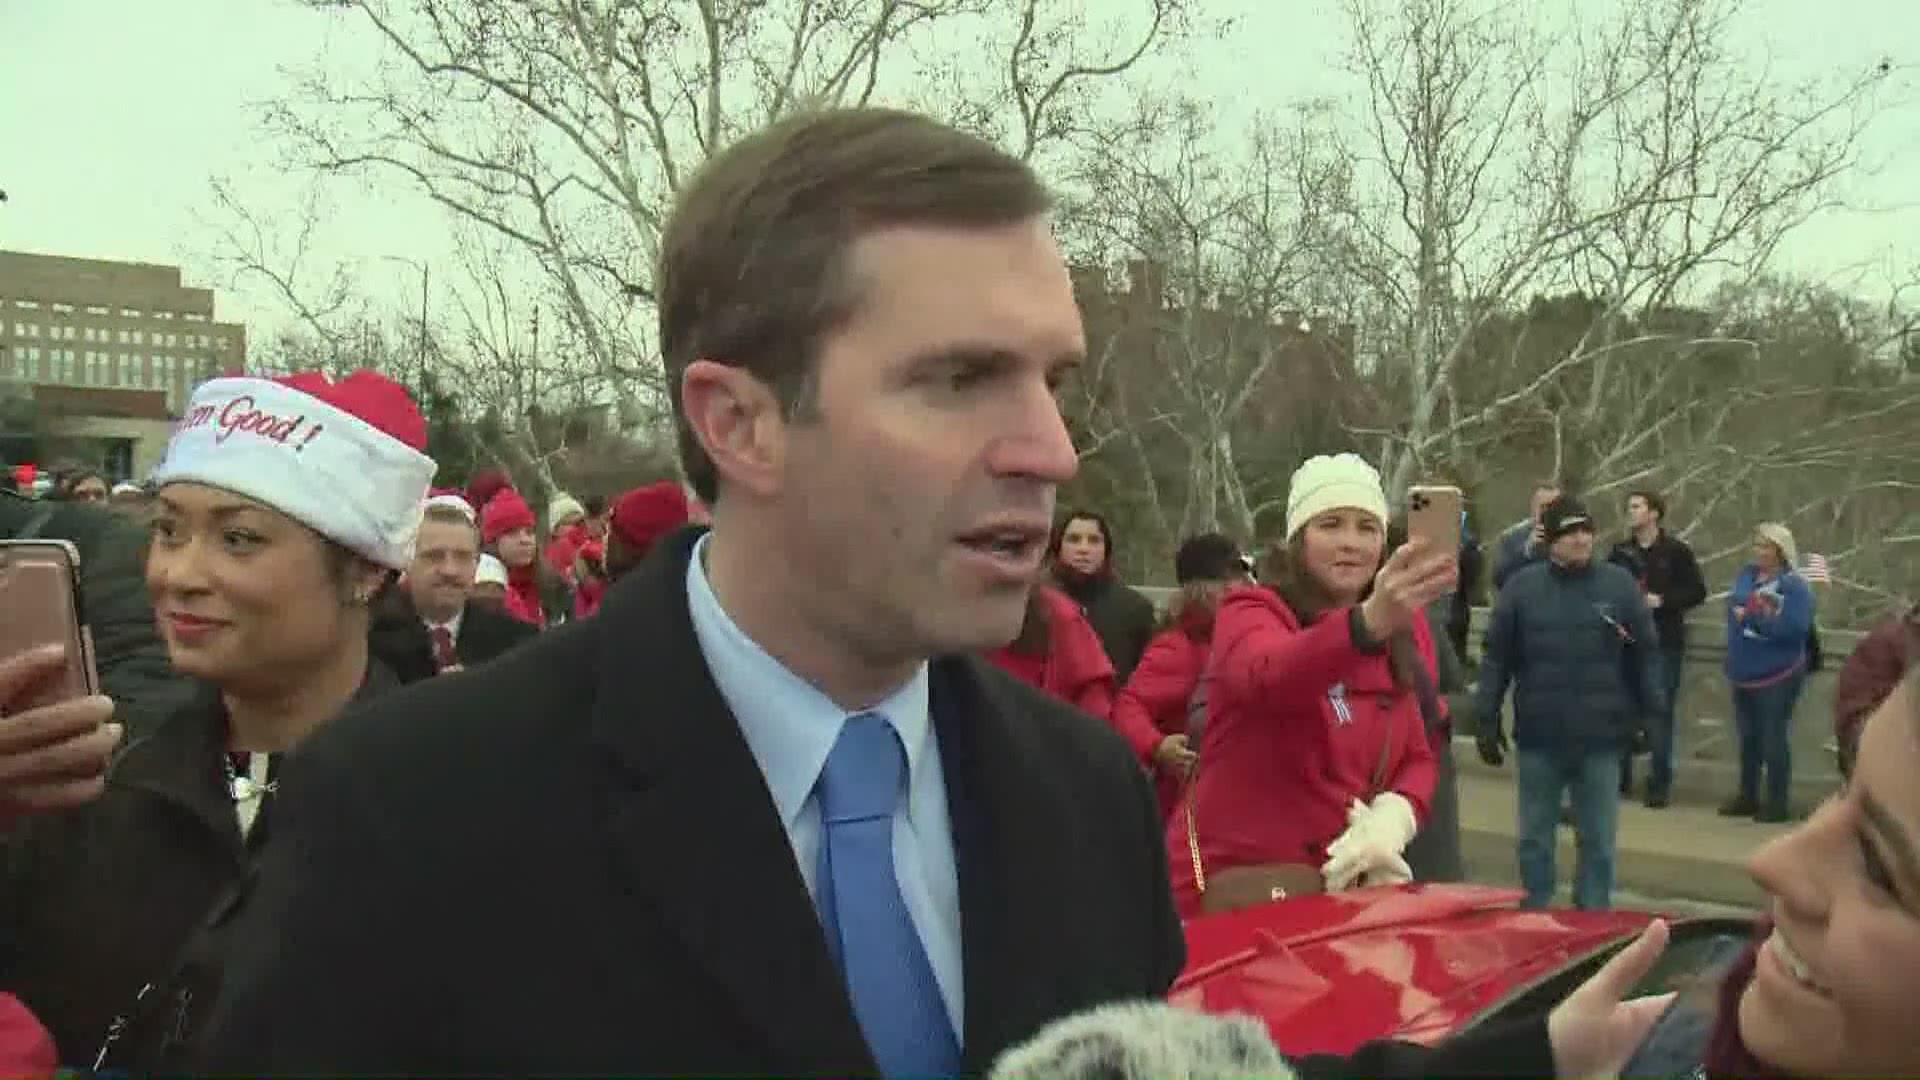 Beshear says teachers have gone "from being locked out to leading the way."